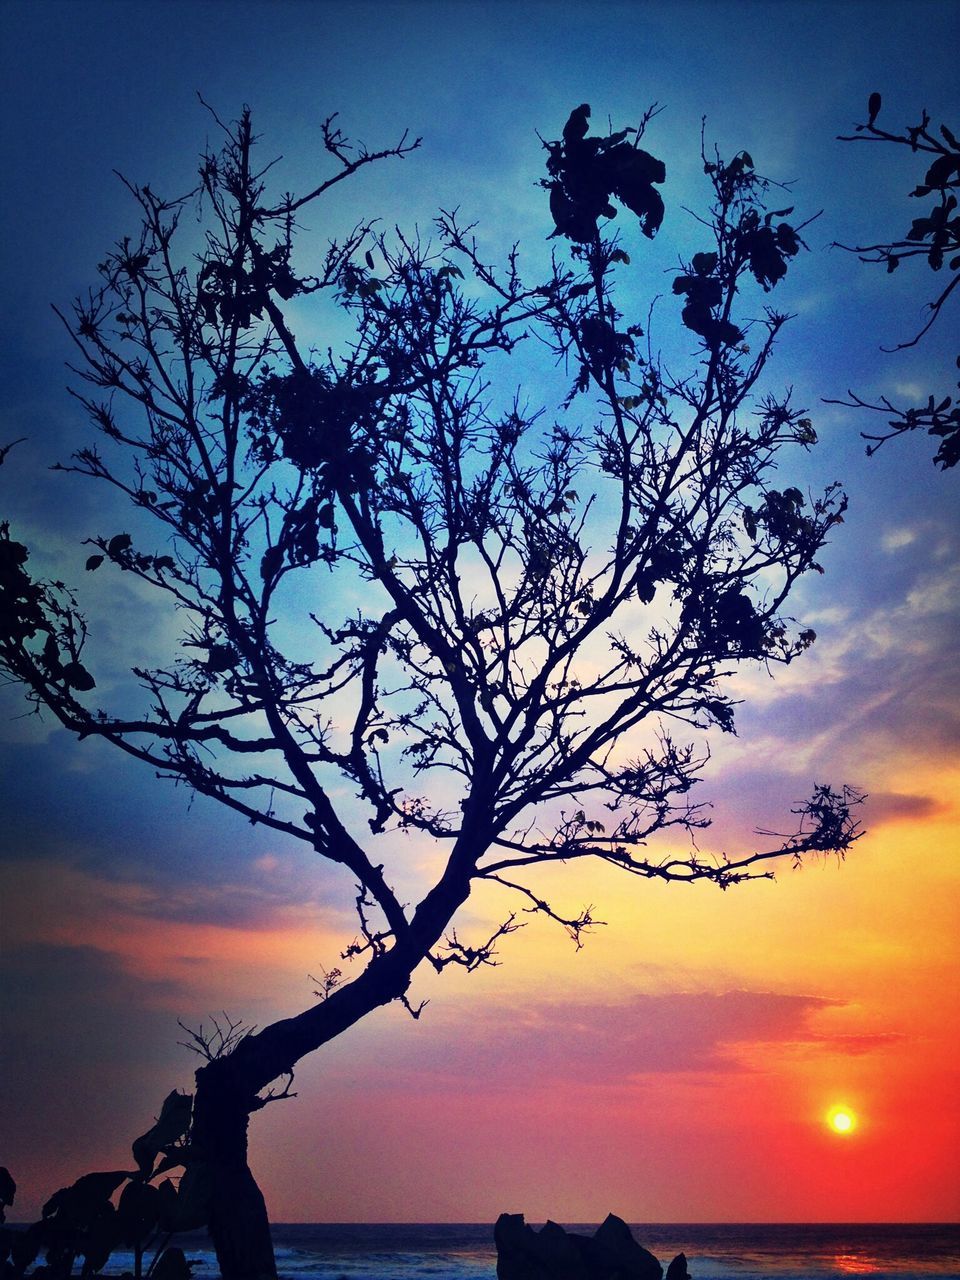 sunset, silhouette, tranquility, scenics, tranquil scene, sky, beauty in nature, horizon over water, sea, water, branch, nature, orange color, idyllic, tree, bare tree, sun, cloud - sky, dusk, majestic